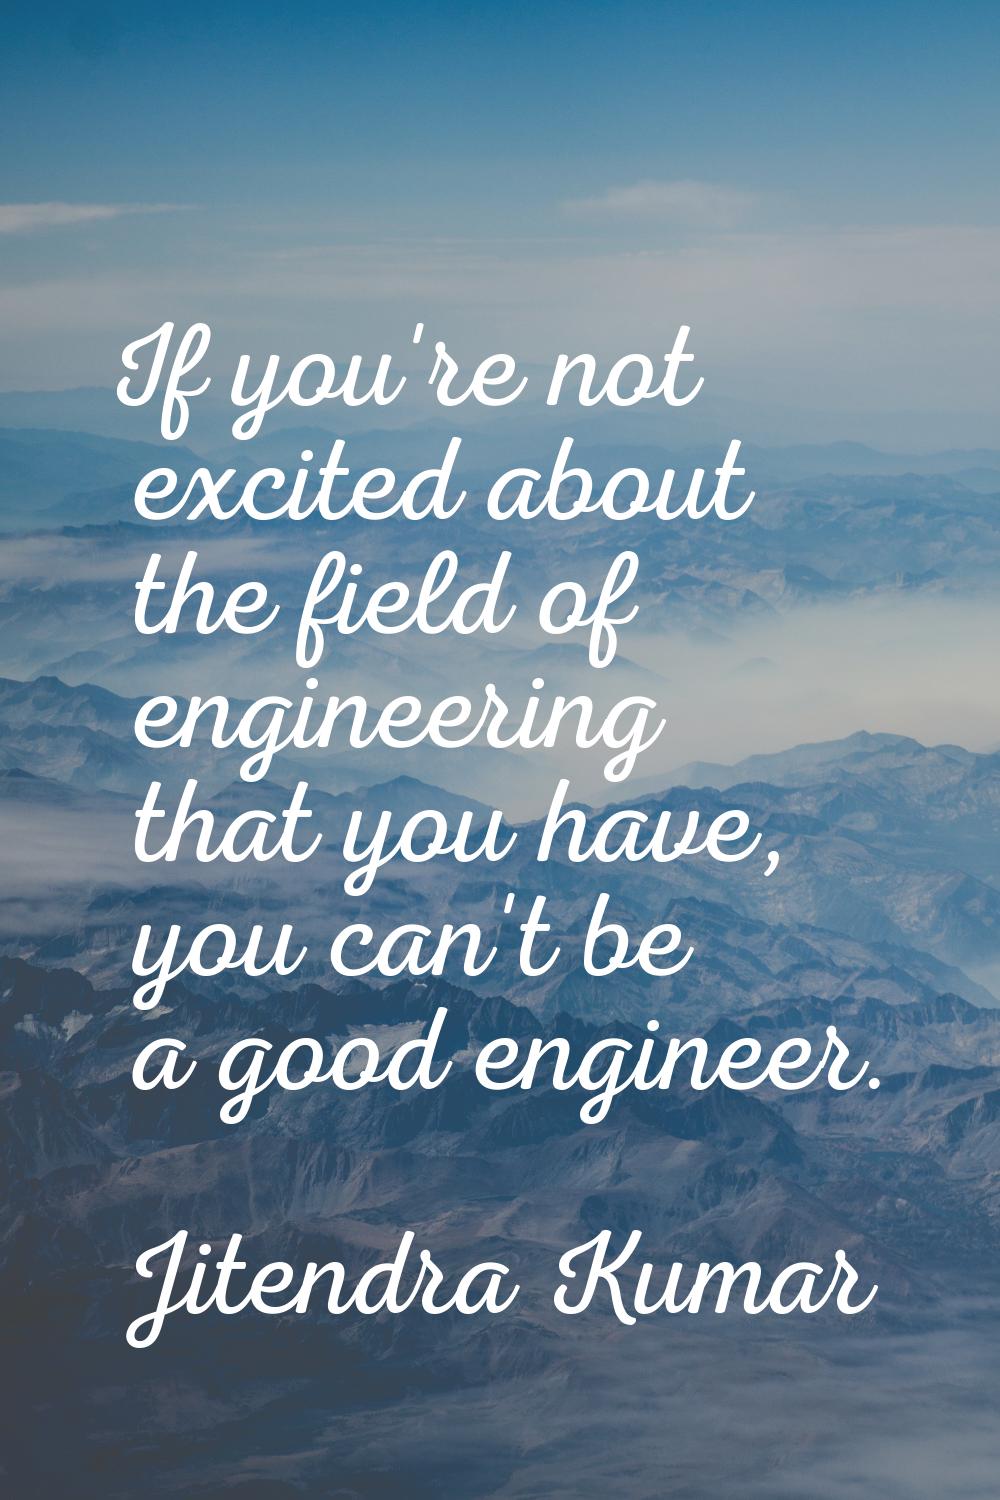 If you're not excited about the field of engineering that you have, you can't be a good engineer.